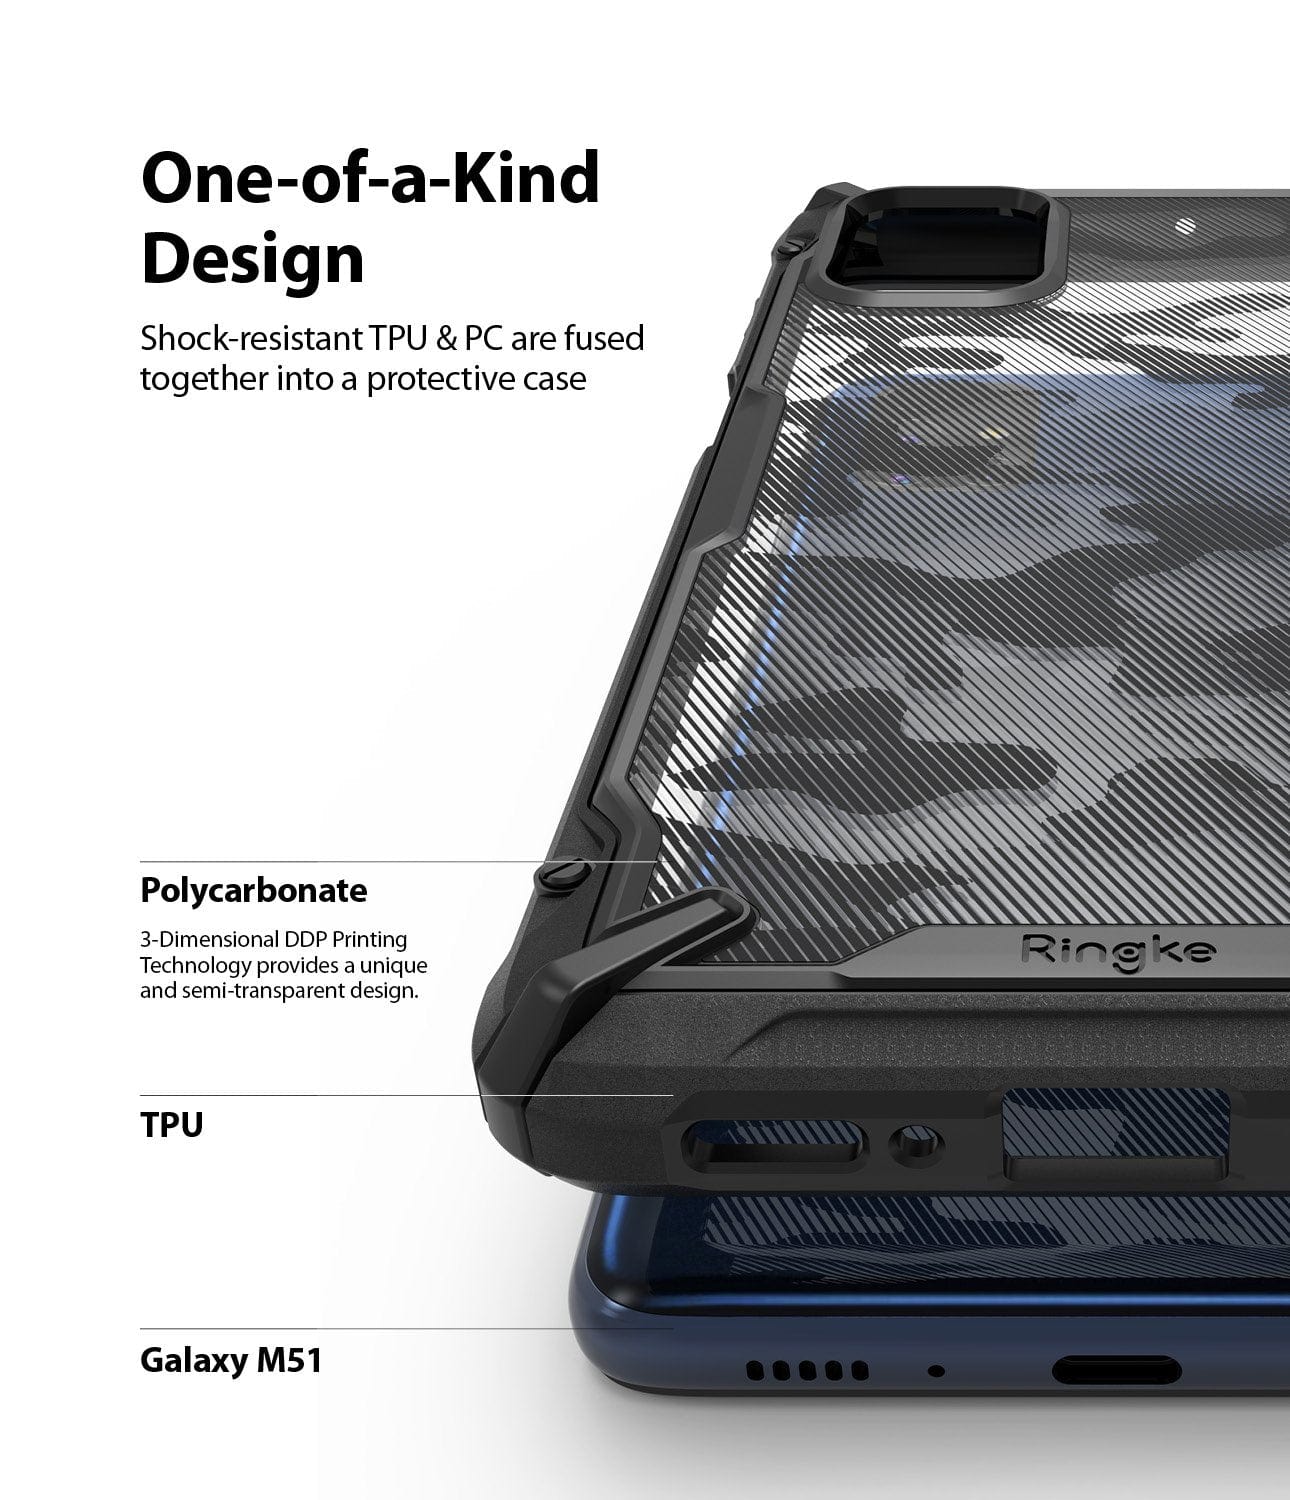 Shock-resistant TPU and PC material designed for Galaxy M51 